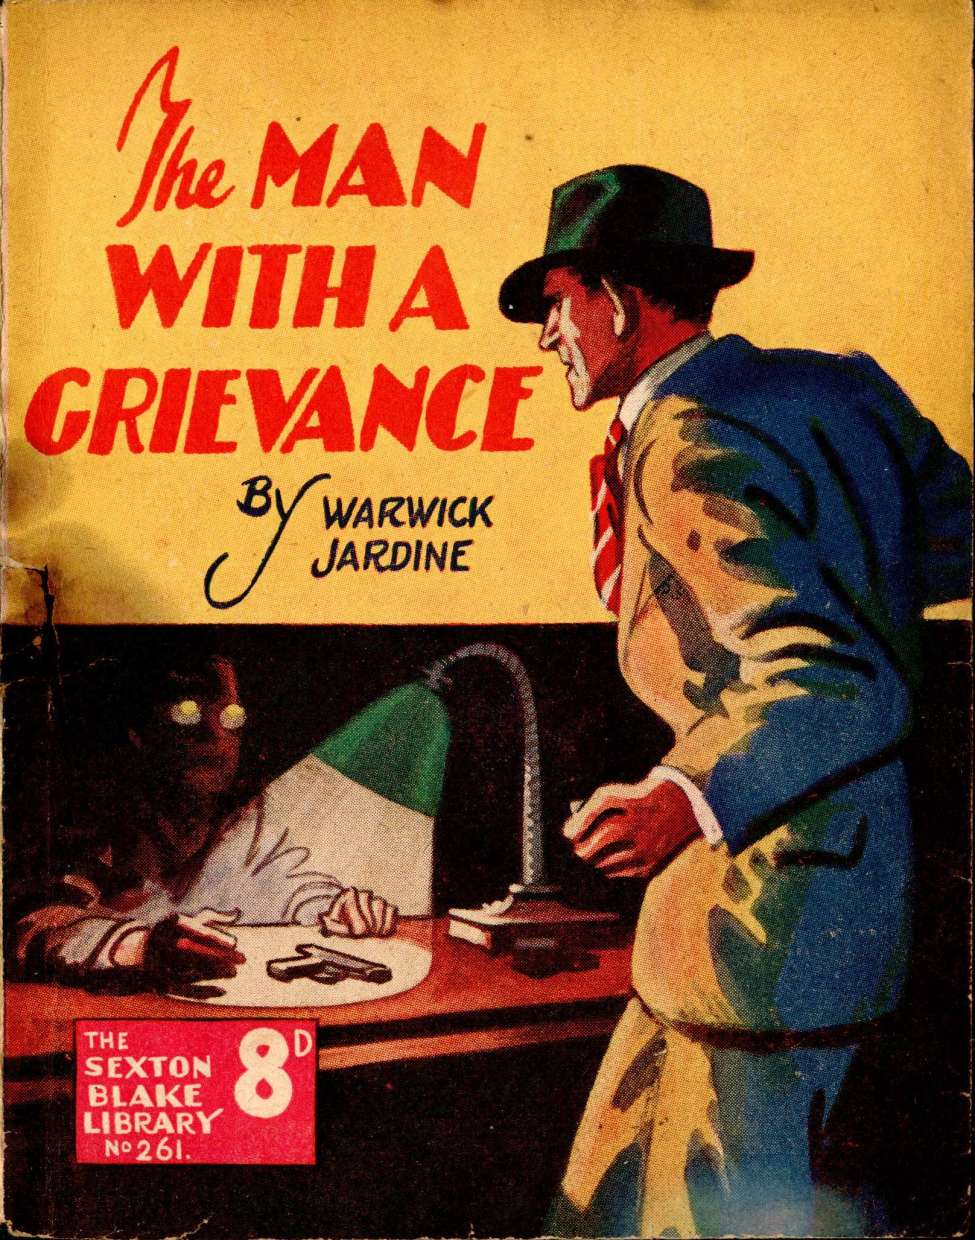 Book Cover For Sexton Blake Library S3 261 - The Man with a Grievance